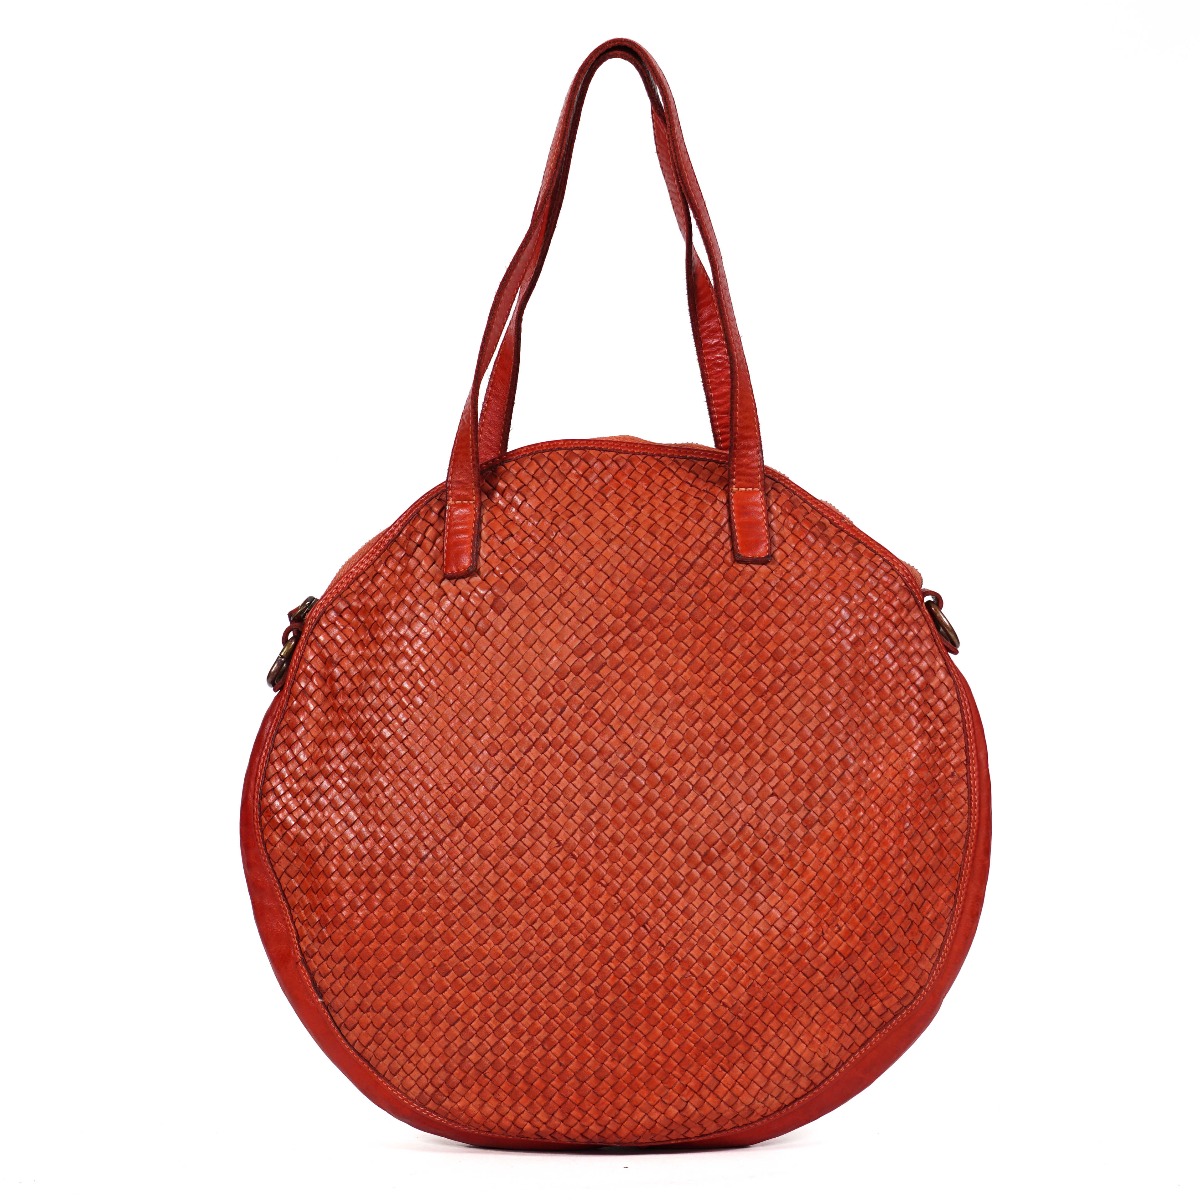 Vintage woven leather Premium line round leather tote